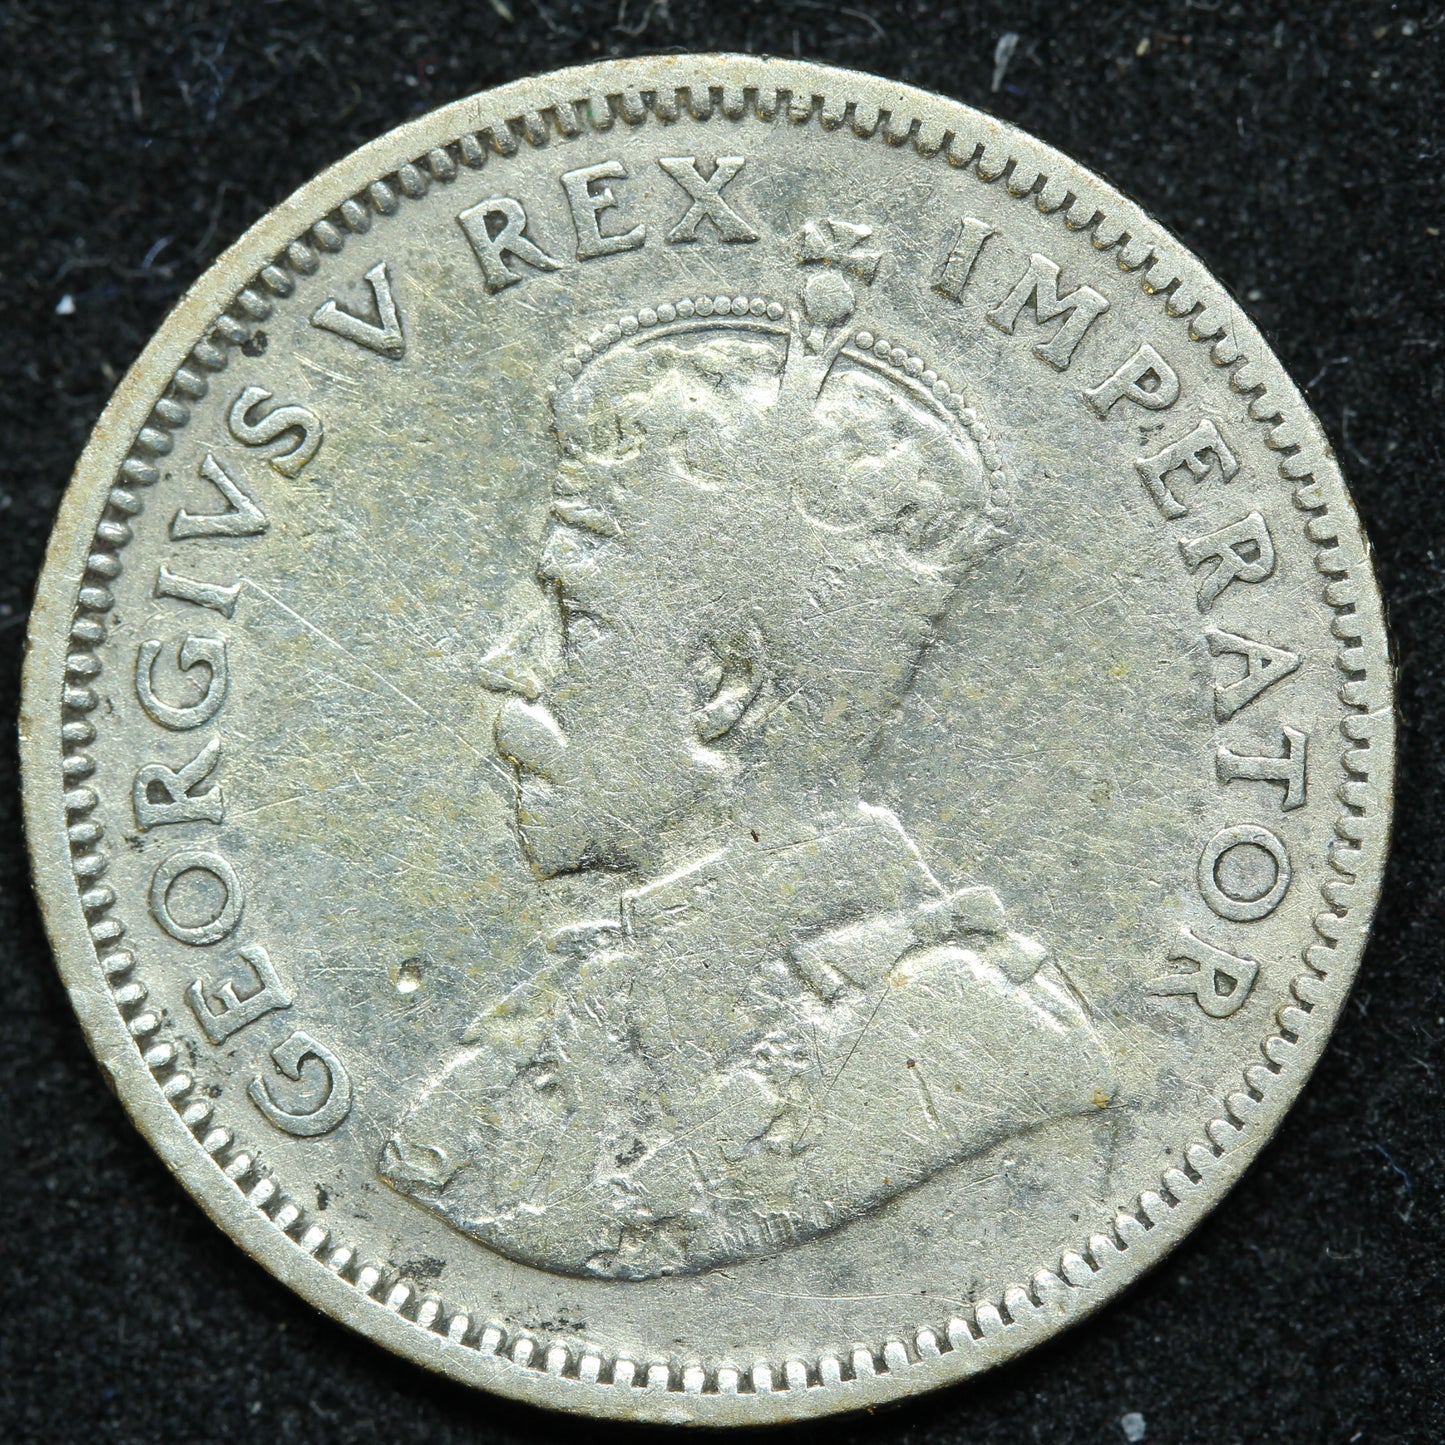 1933 South Africa 6 Six Pence Silver Coin - KM# 16.2